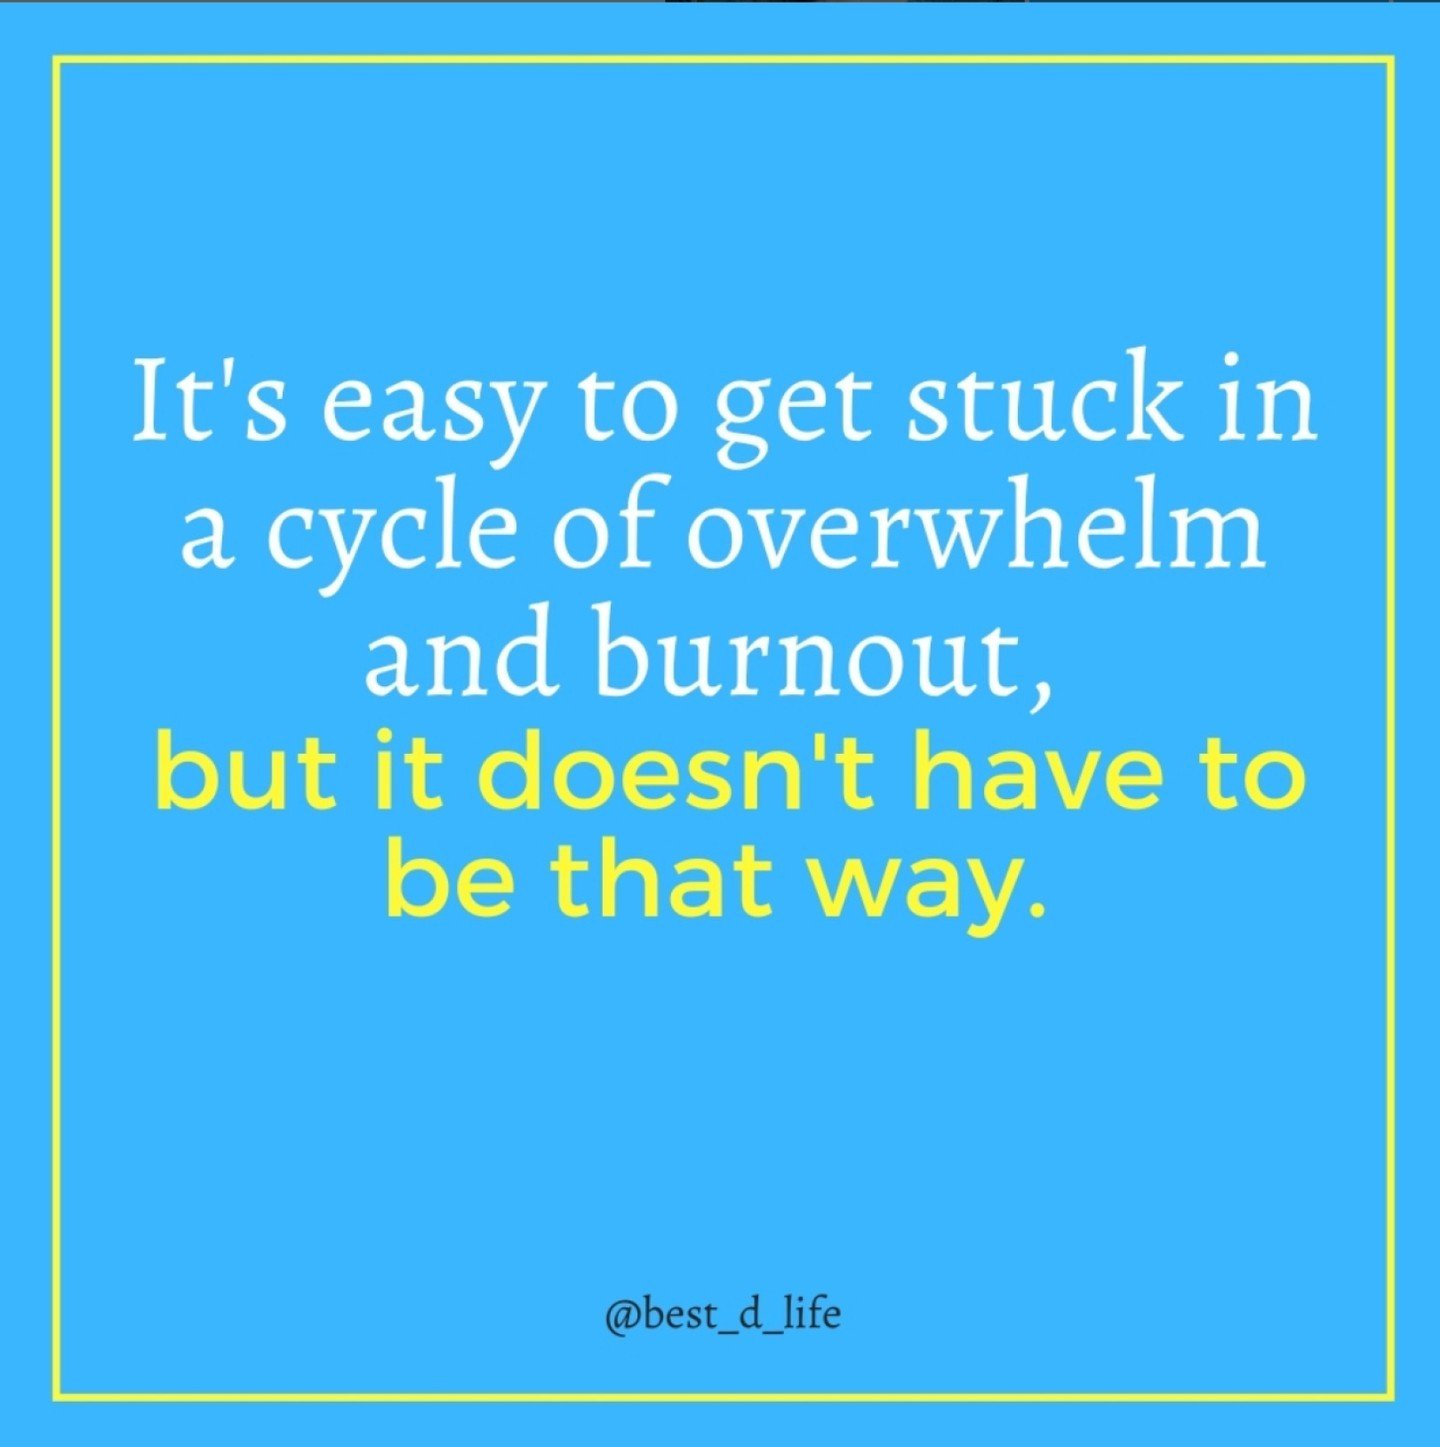 Are you juggling work, kids, and a never-ending to-do list?

It's easy to get stuck in a cycle of overwhelm and burnout, but it doesn't have to be that way.

If you're still reading this, it's because you want things to be different, right?

You want